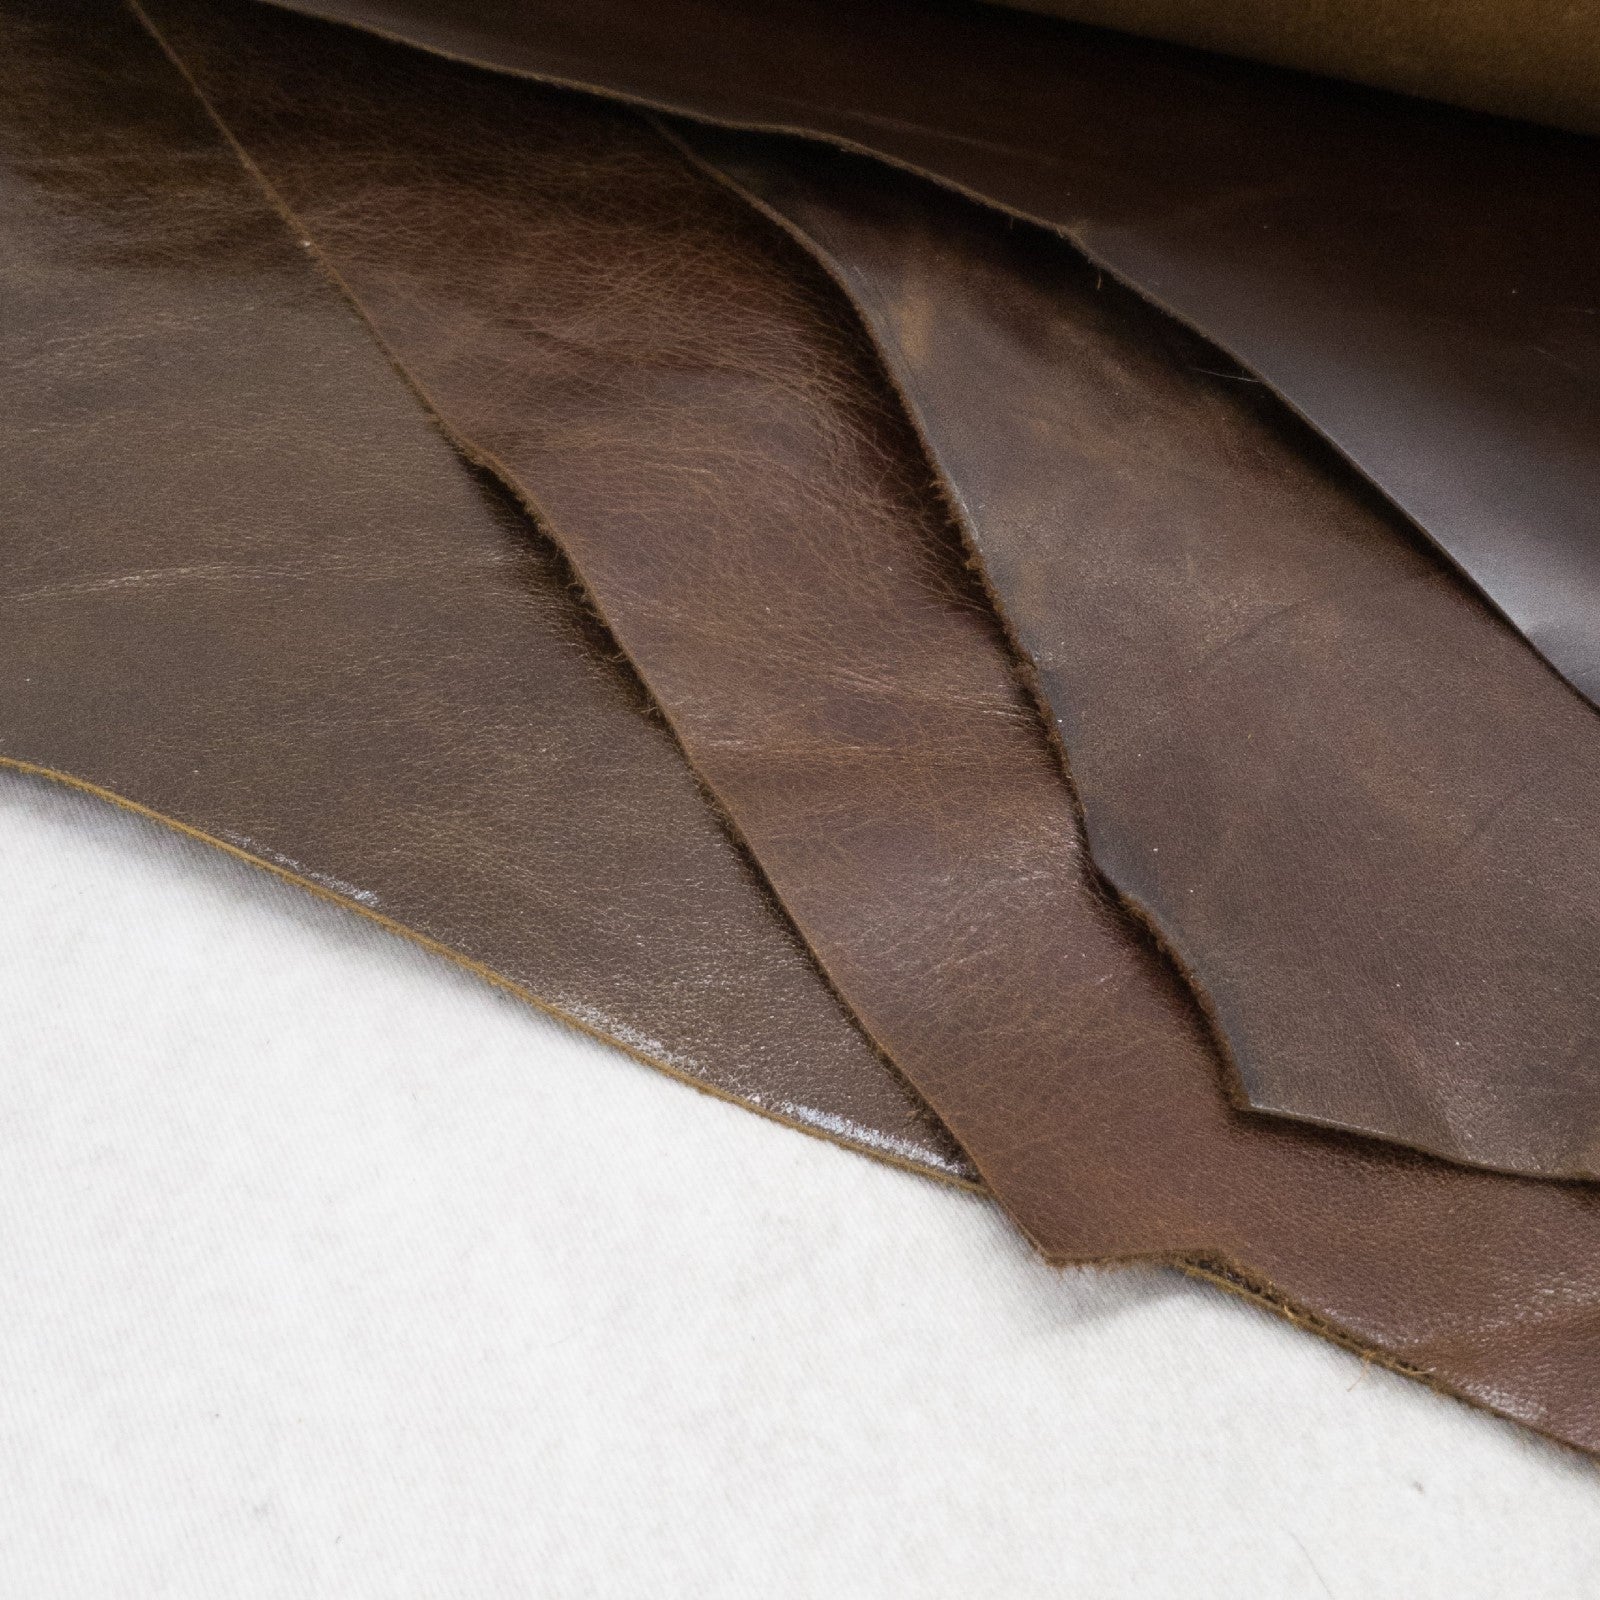 Dark Brown, 2-4 oz, 3-10 Sq Ft, Upholstery Cow Project Pieces,  | The Leather Guy